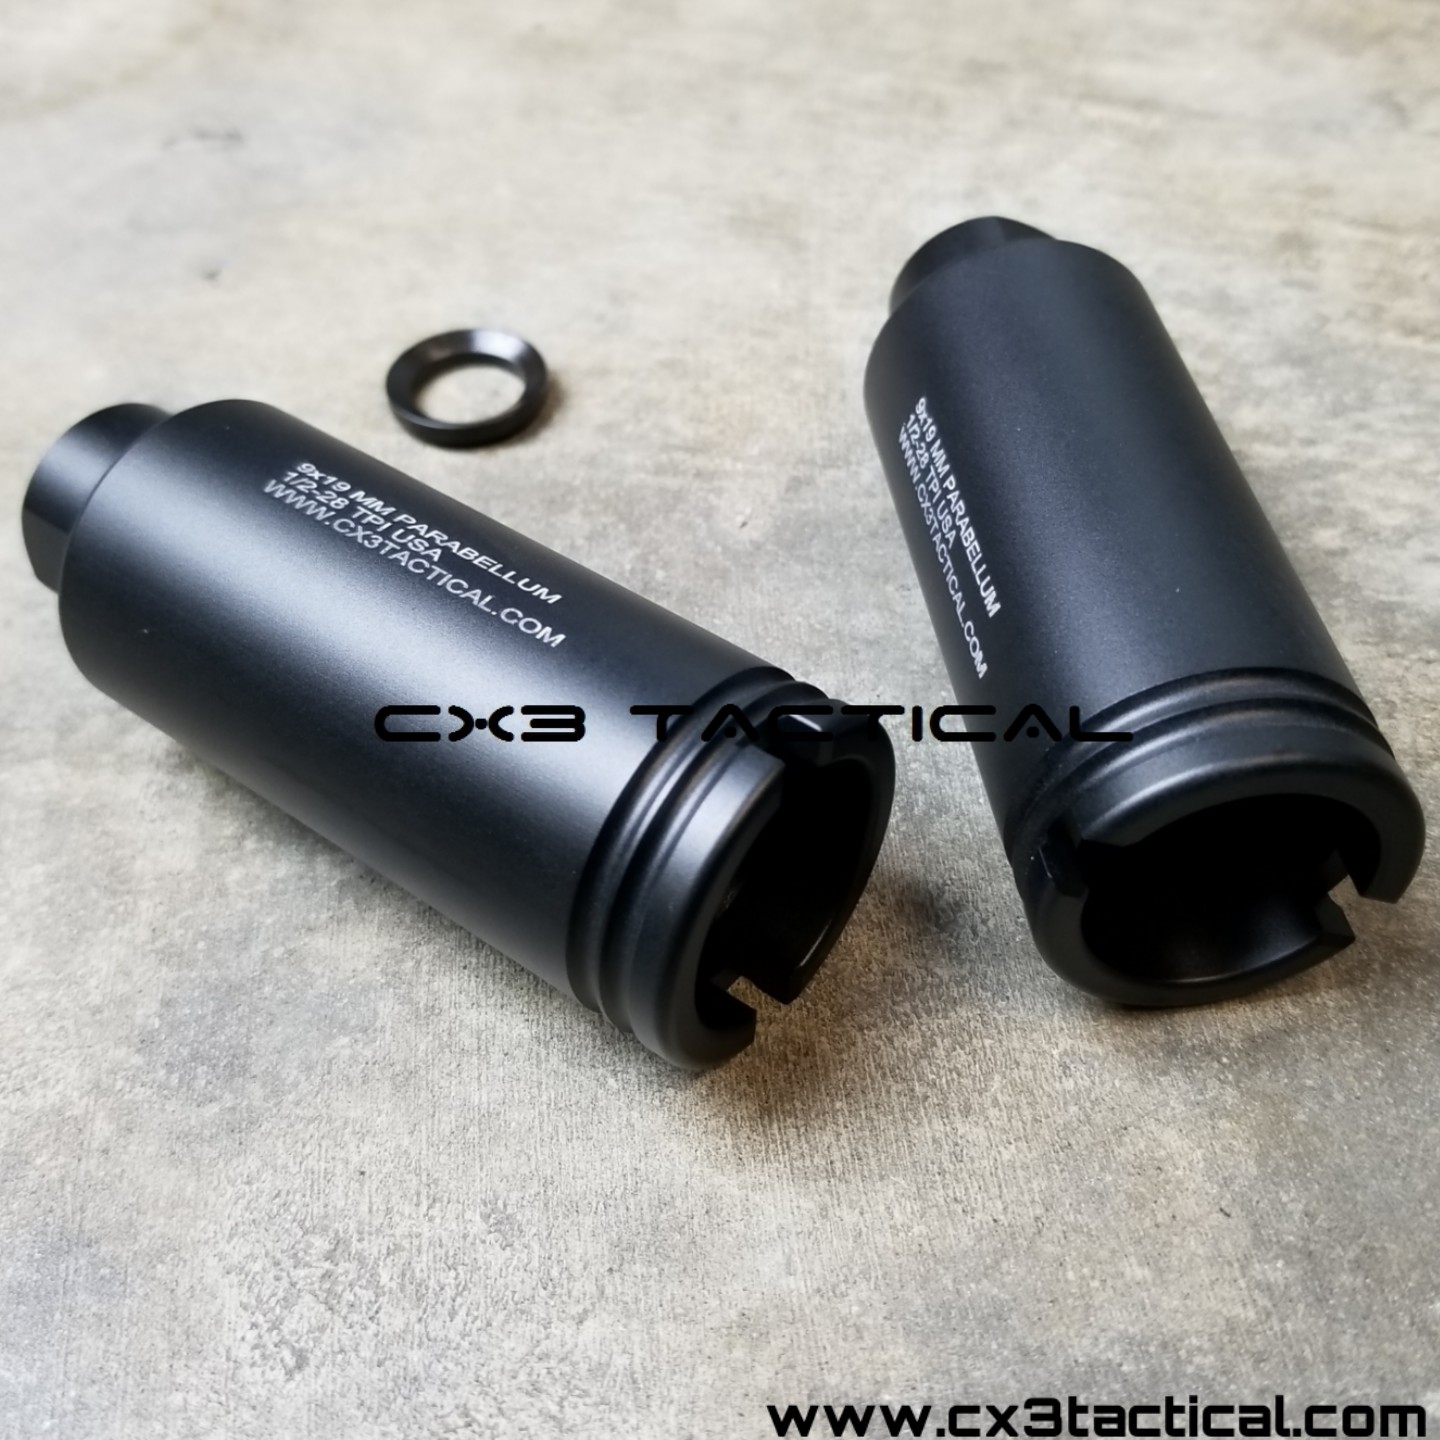 US 1/2x36 Threaded Compact Short Competition Muzzle Brake For 9mm 